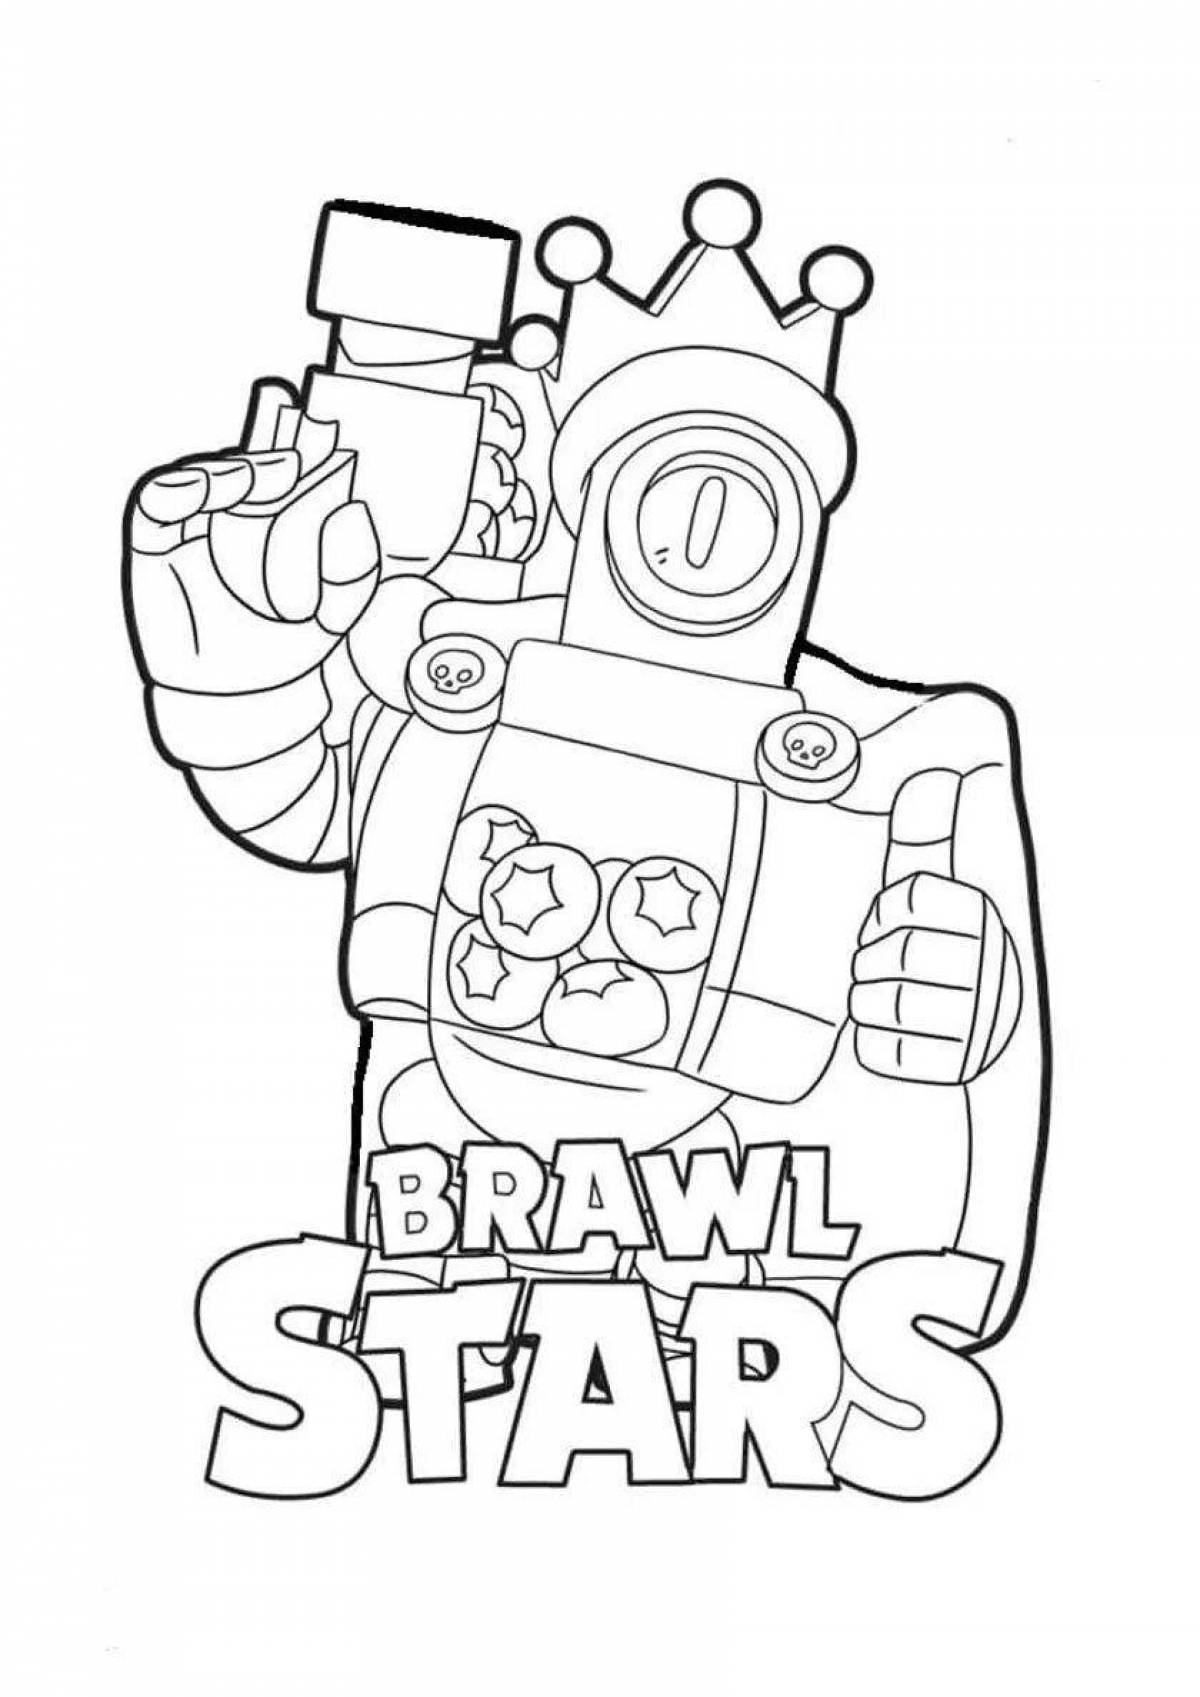 Bravo stars creative coloring lettering page